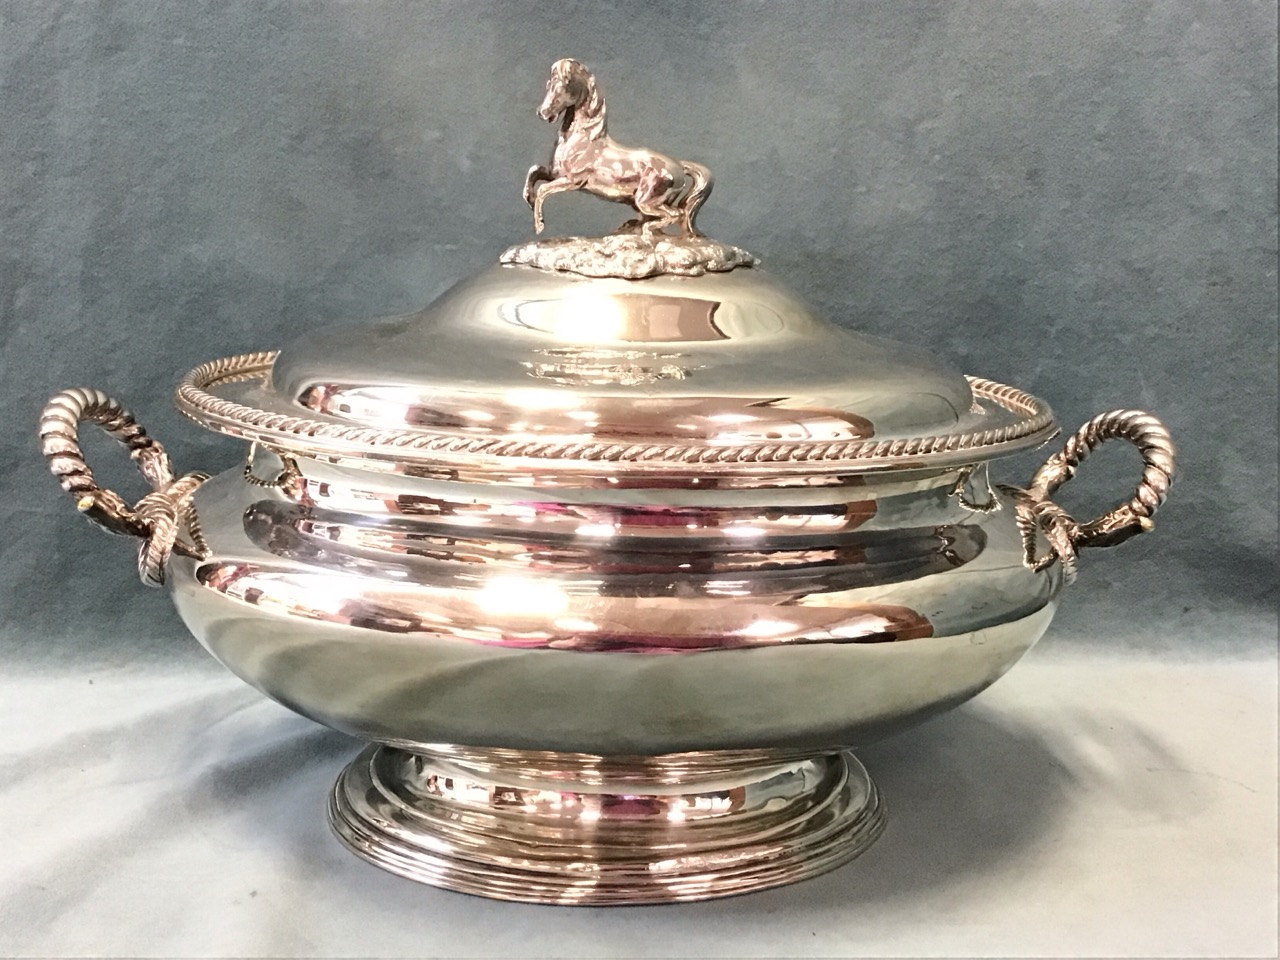 A large nineteenth century oval silver plated tureen & cover with gadrooned rim and handles, the lid